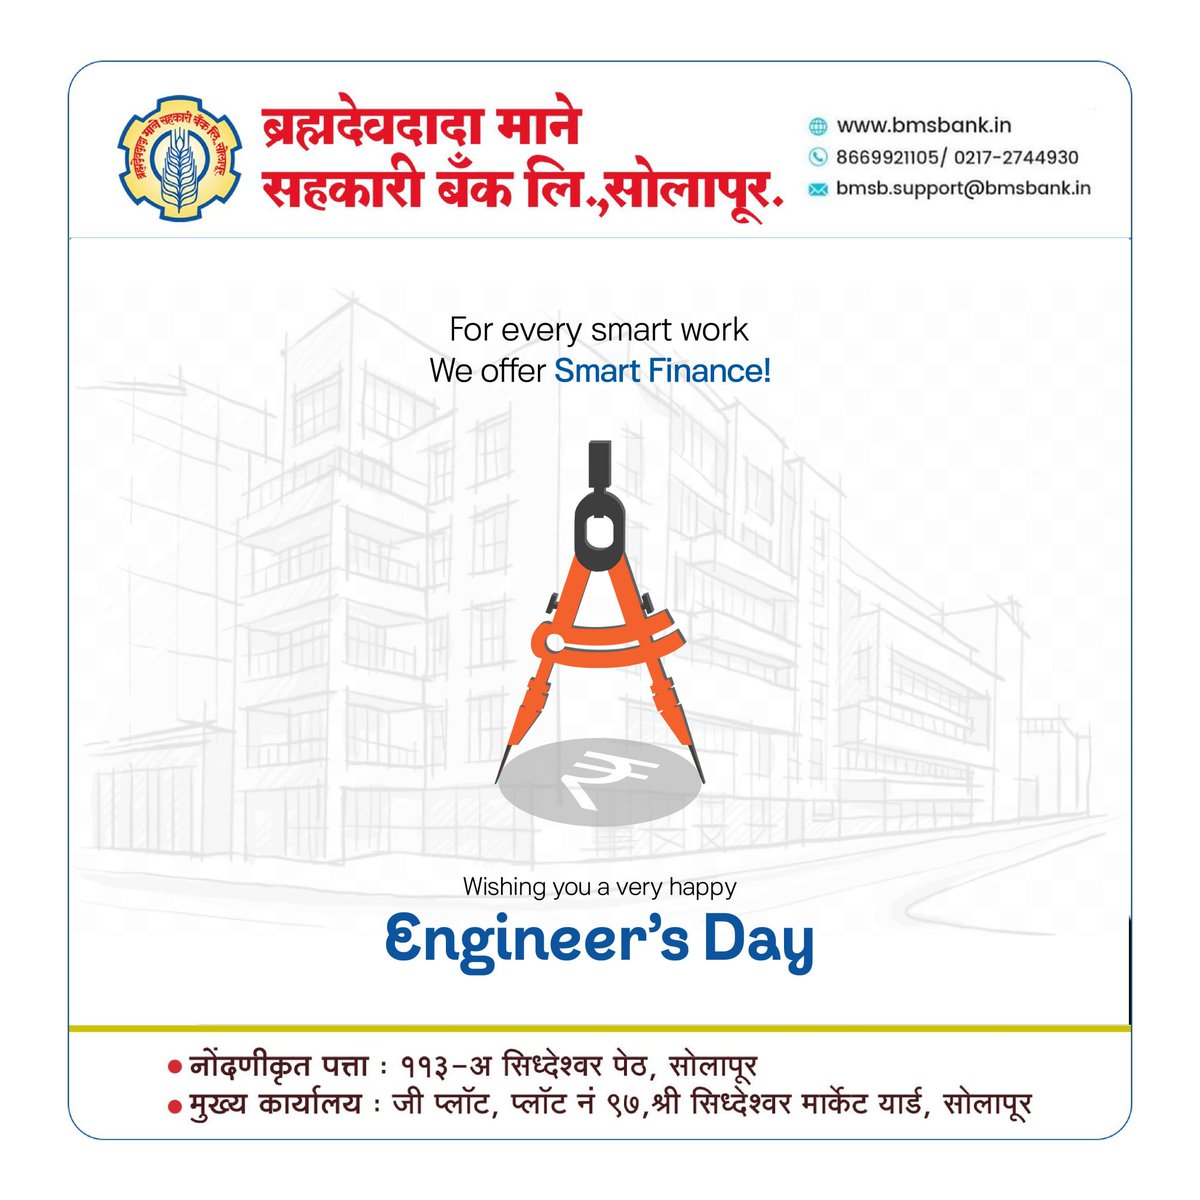 Happy Engineers Day to all the brilliant minds shaping the world with innovation and precision! 💡
Thank you for building a better future, one ingenious idea at a time. 💪🌍

#bmsbank #sahakaribank #EngineersDay #engineers #Engineering #bankingservices #solapur